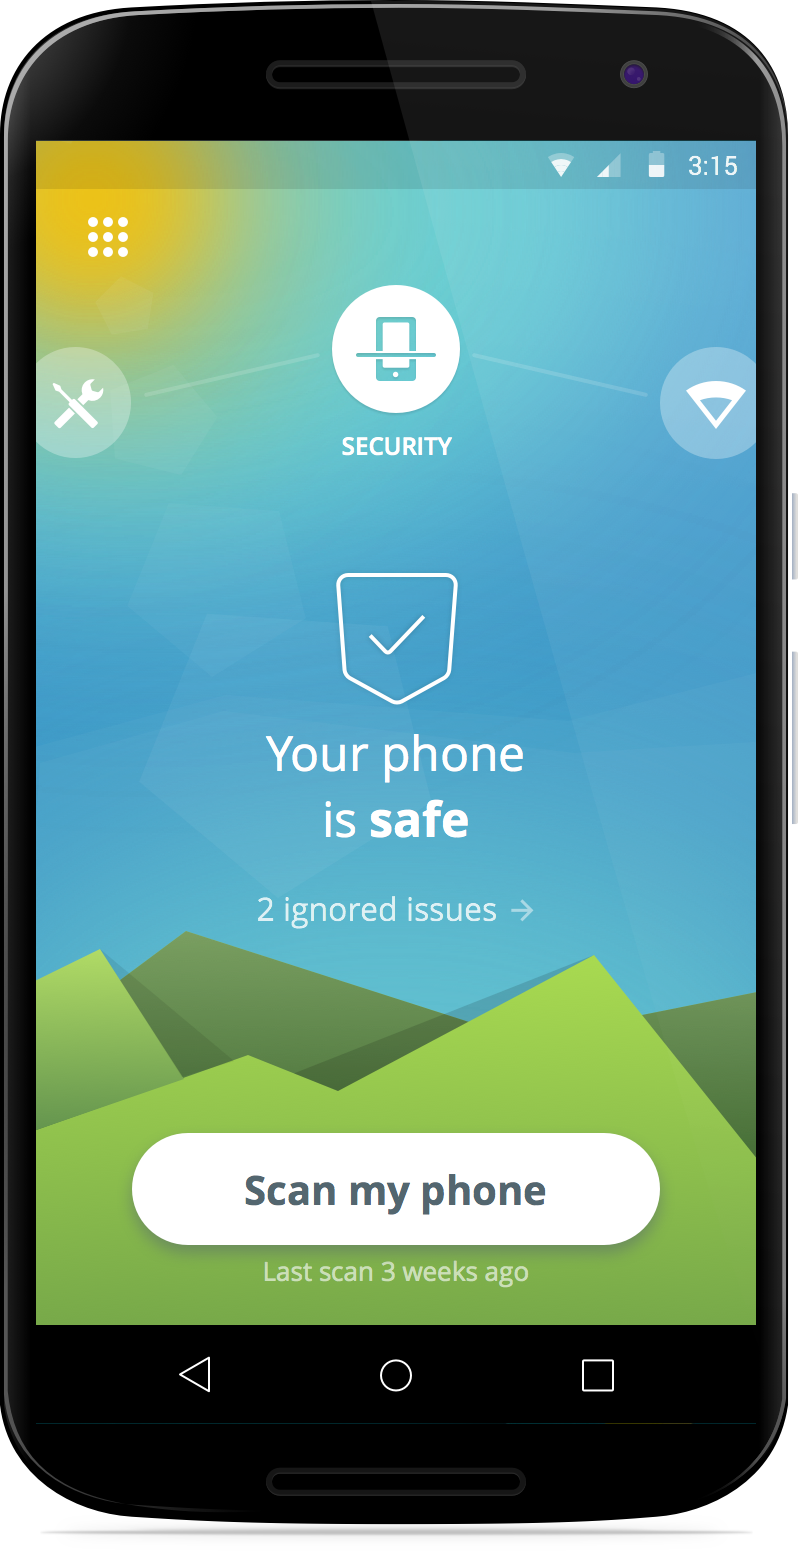 avast mobile security review